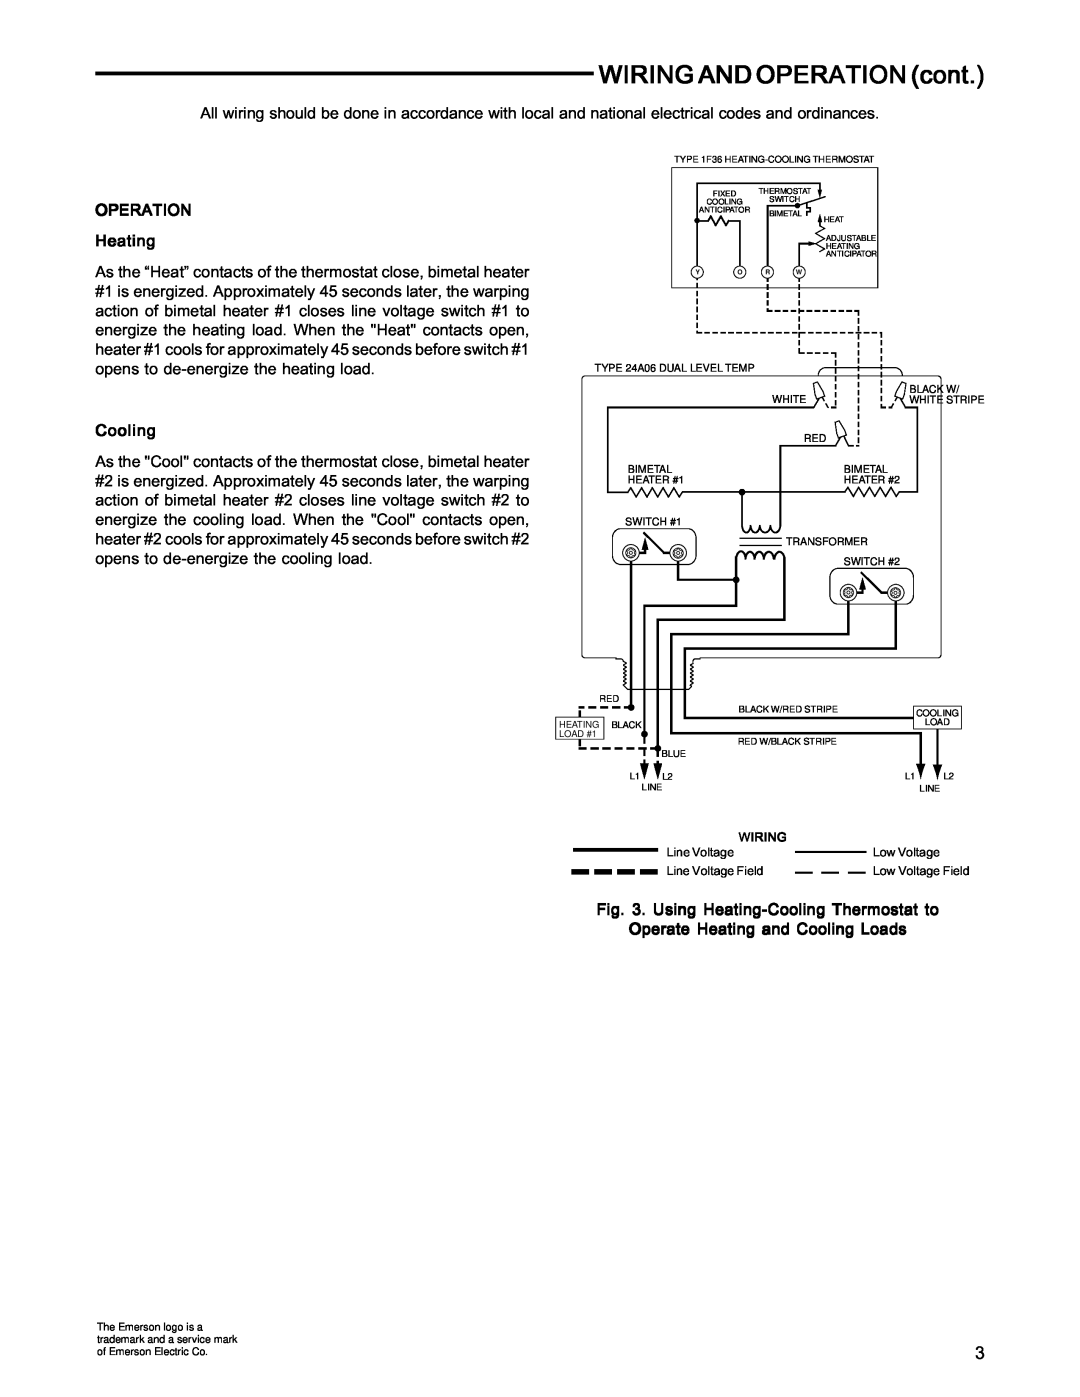 White Rodgers 24A06G-1 specifications WIRING AND OPERATION cont, OPERATION Heating, Using Heating-CoolingThermostat to 